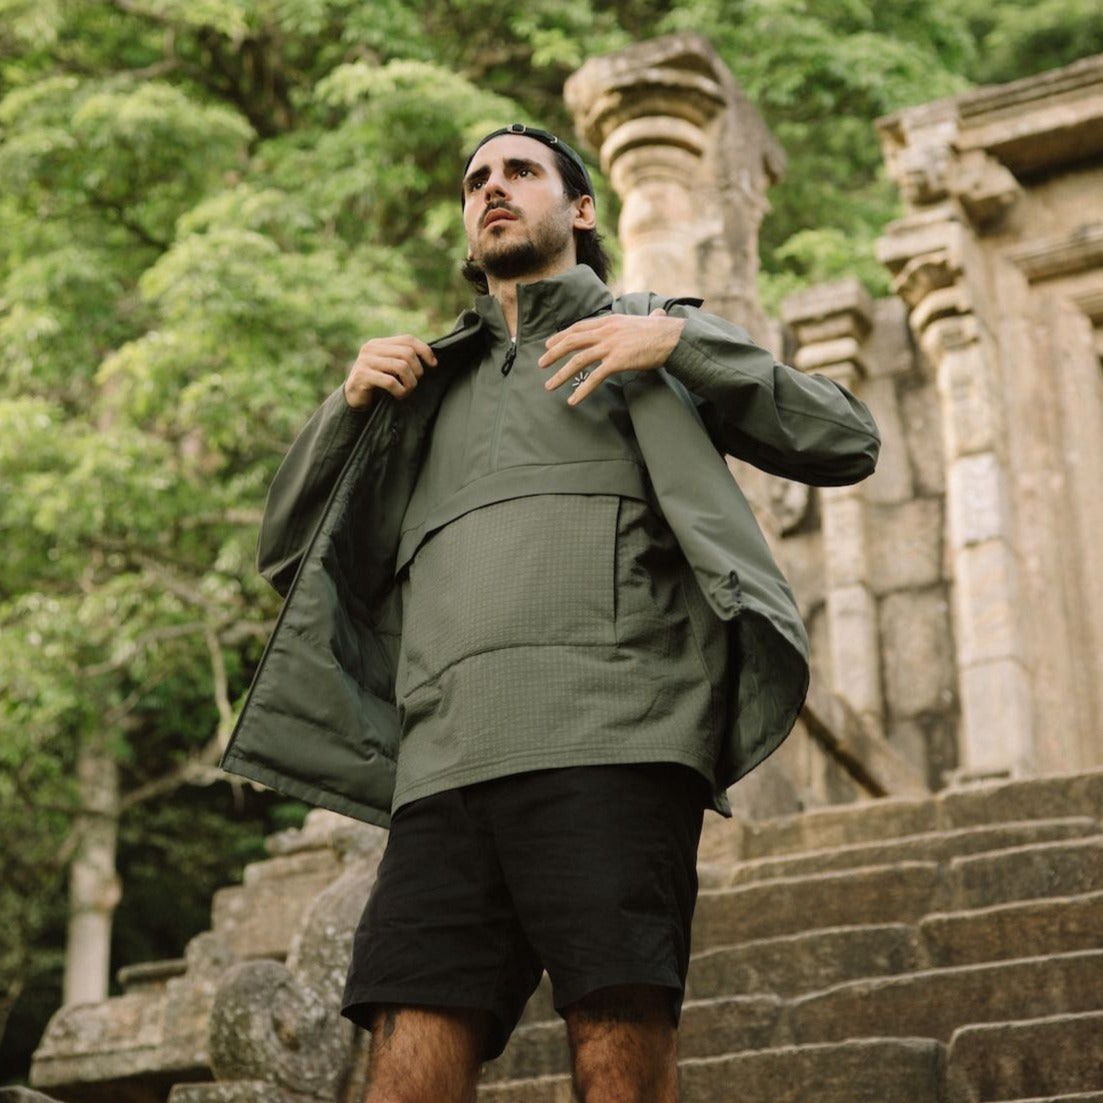 Tropicfeel NS40 - The All-Possible Travel Jacket - Storming Gravity